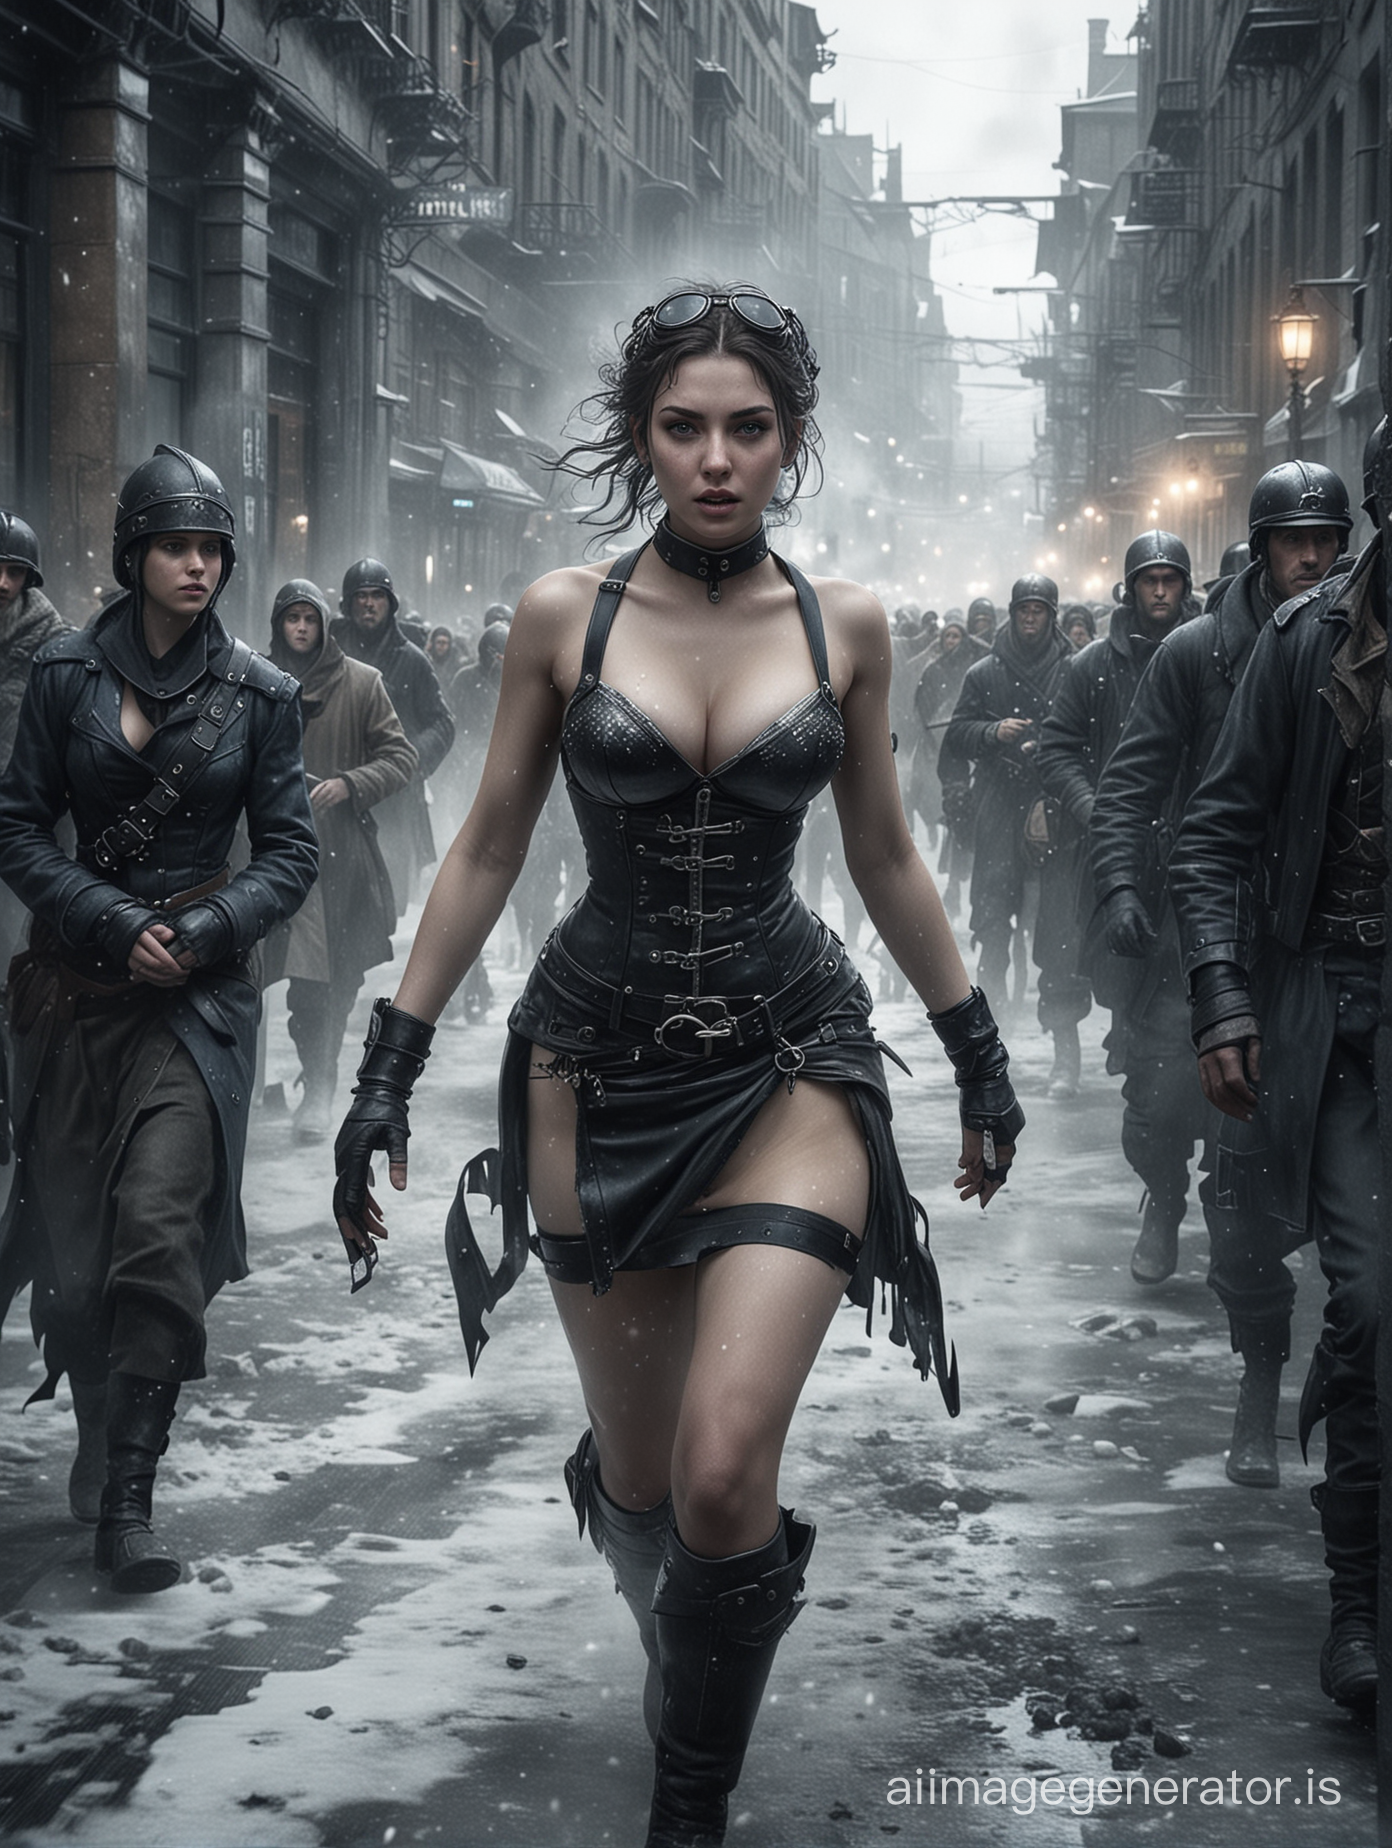 frostpunk setting, scantilly clad young woman rushing through the city, lots of people. realistic photograph